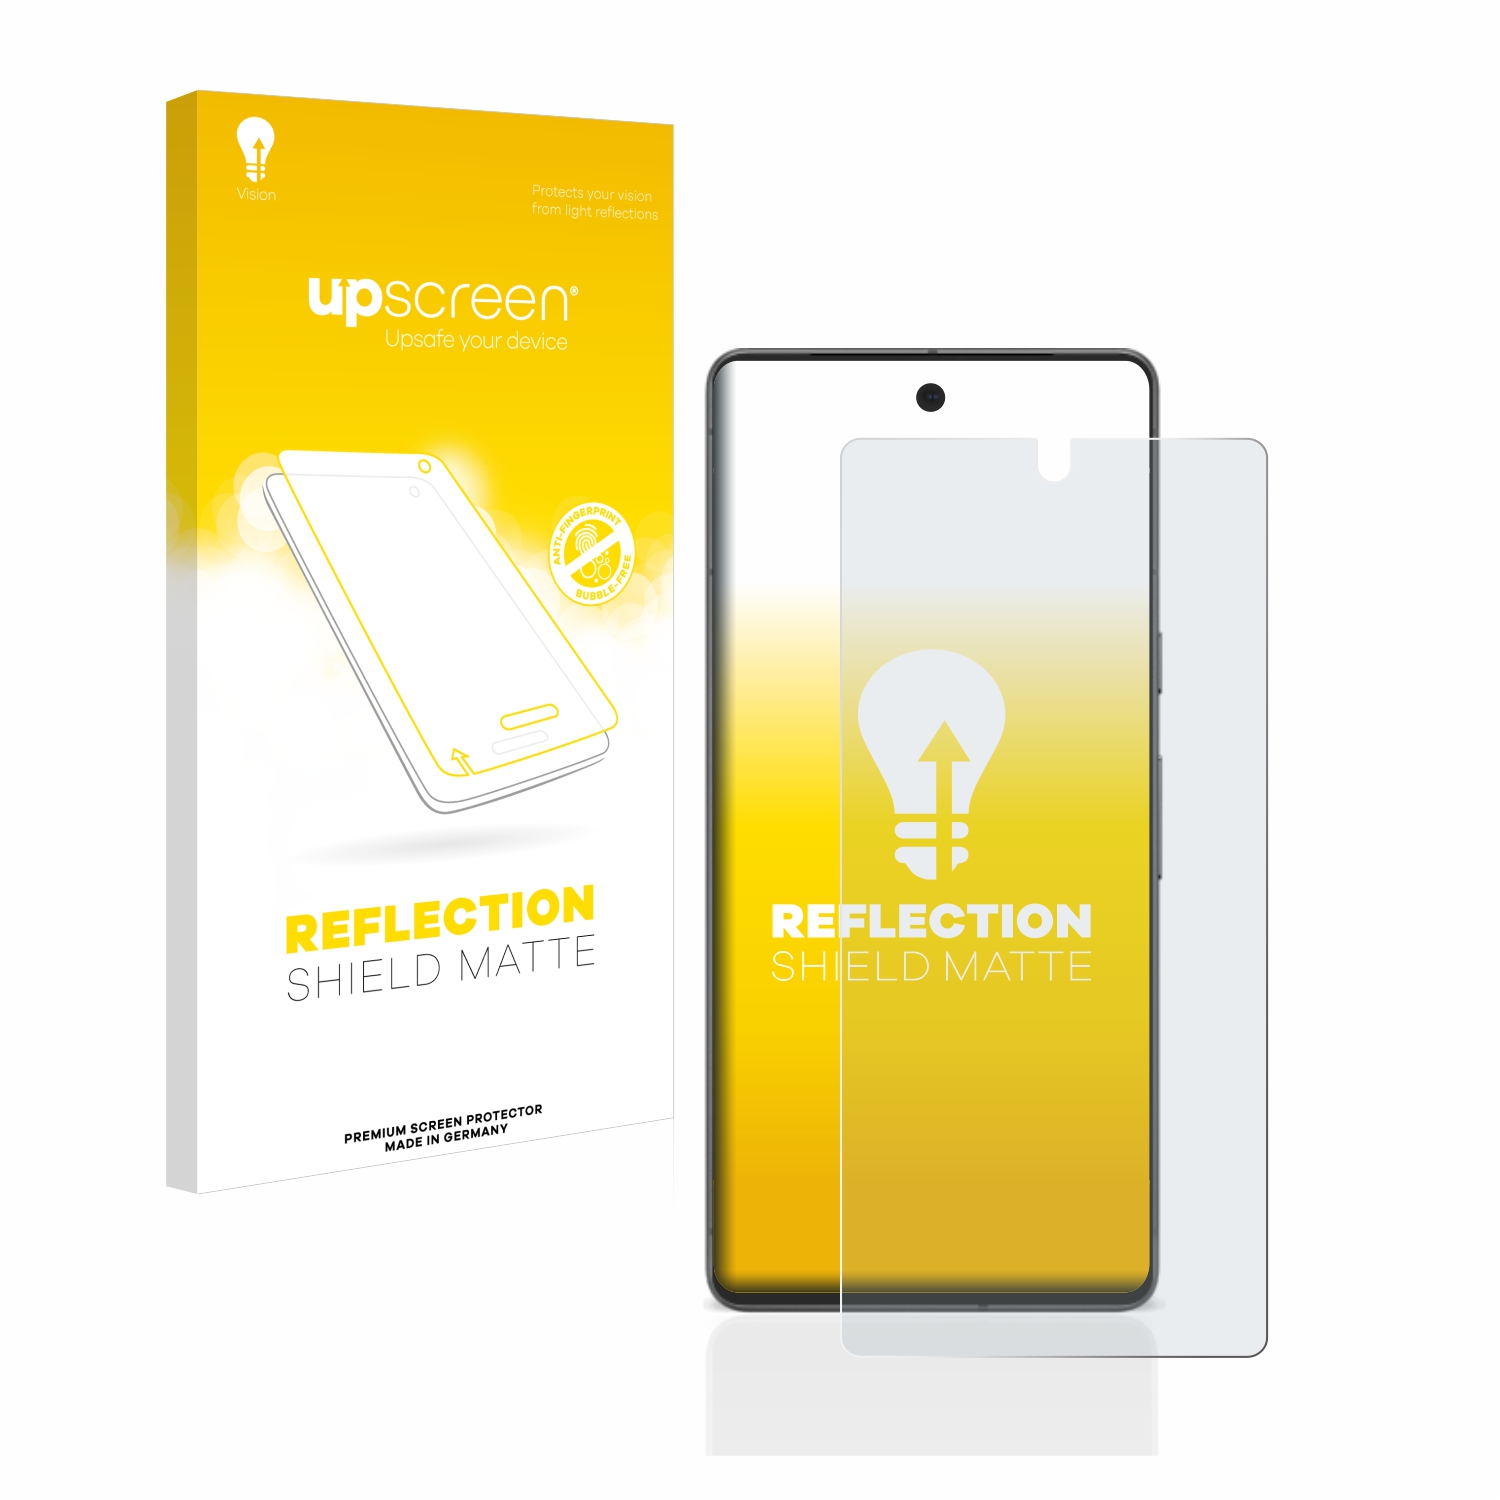 ASUS upscreen Anti Glare Screen Protector for Asus MT276HE Reflection Shield Matte 4059181132310 